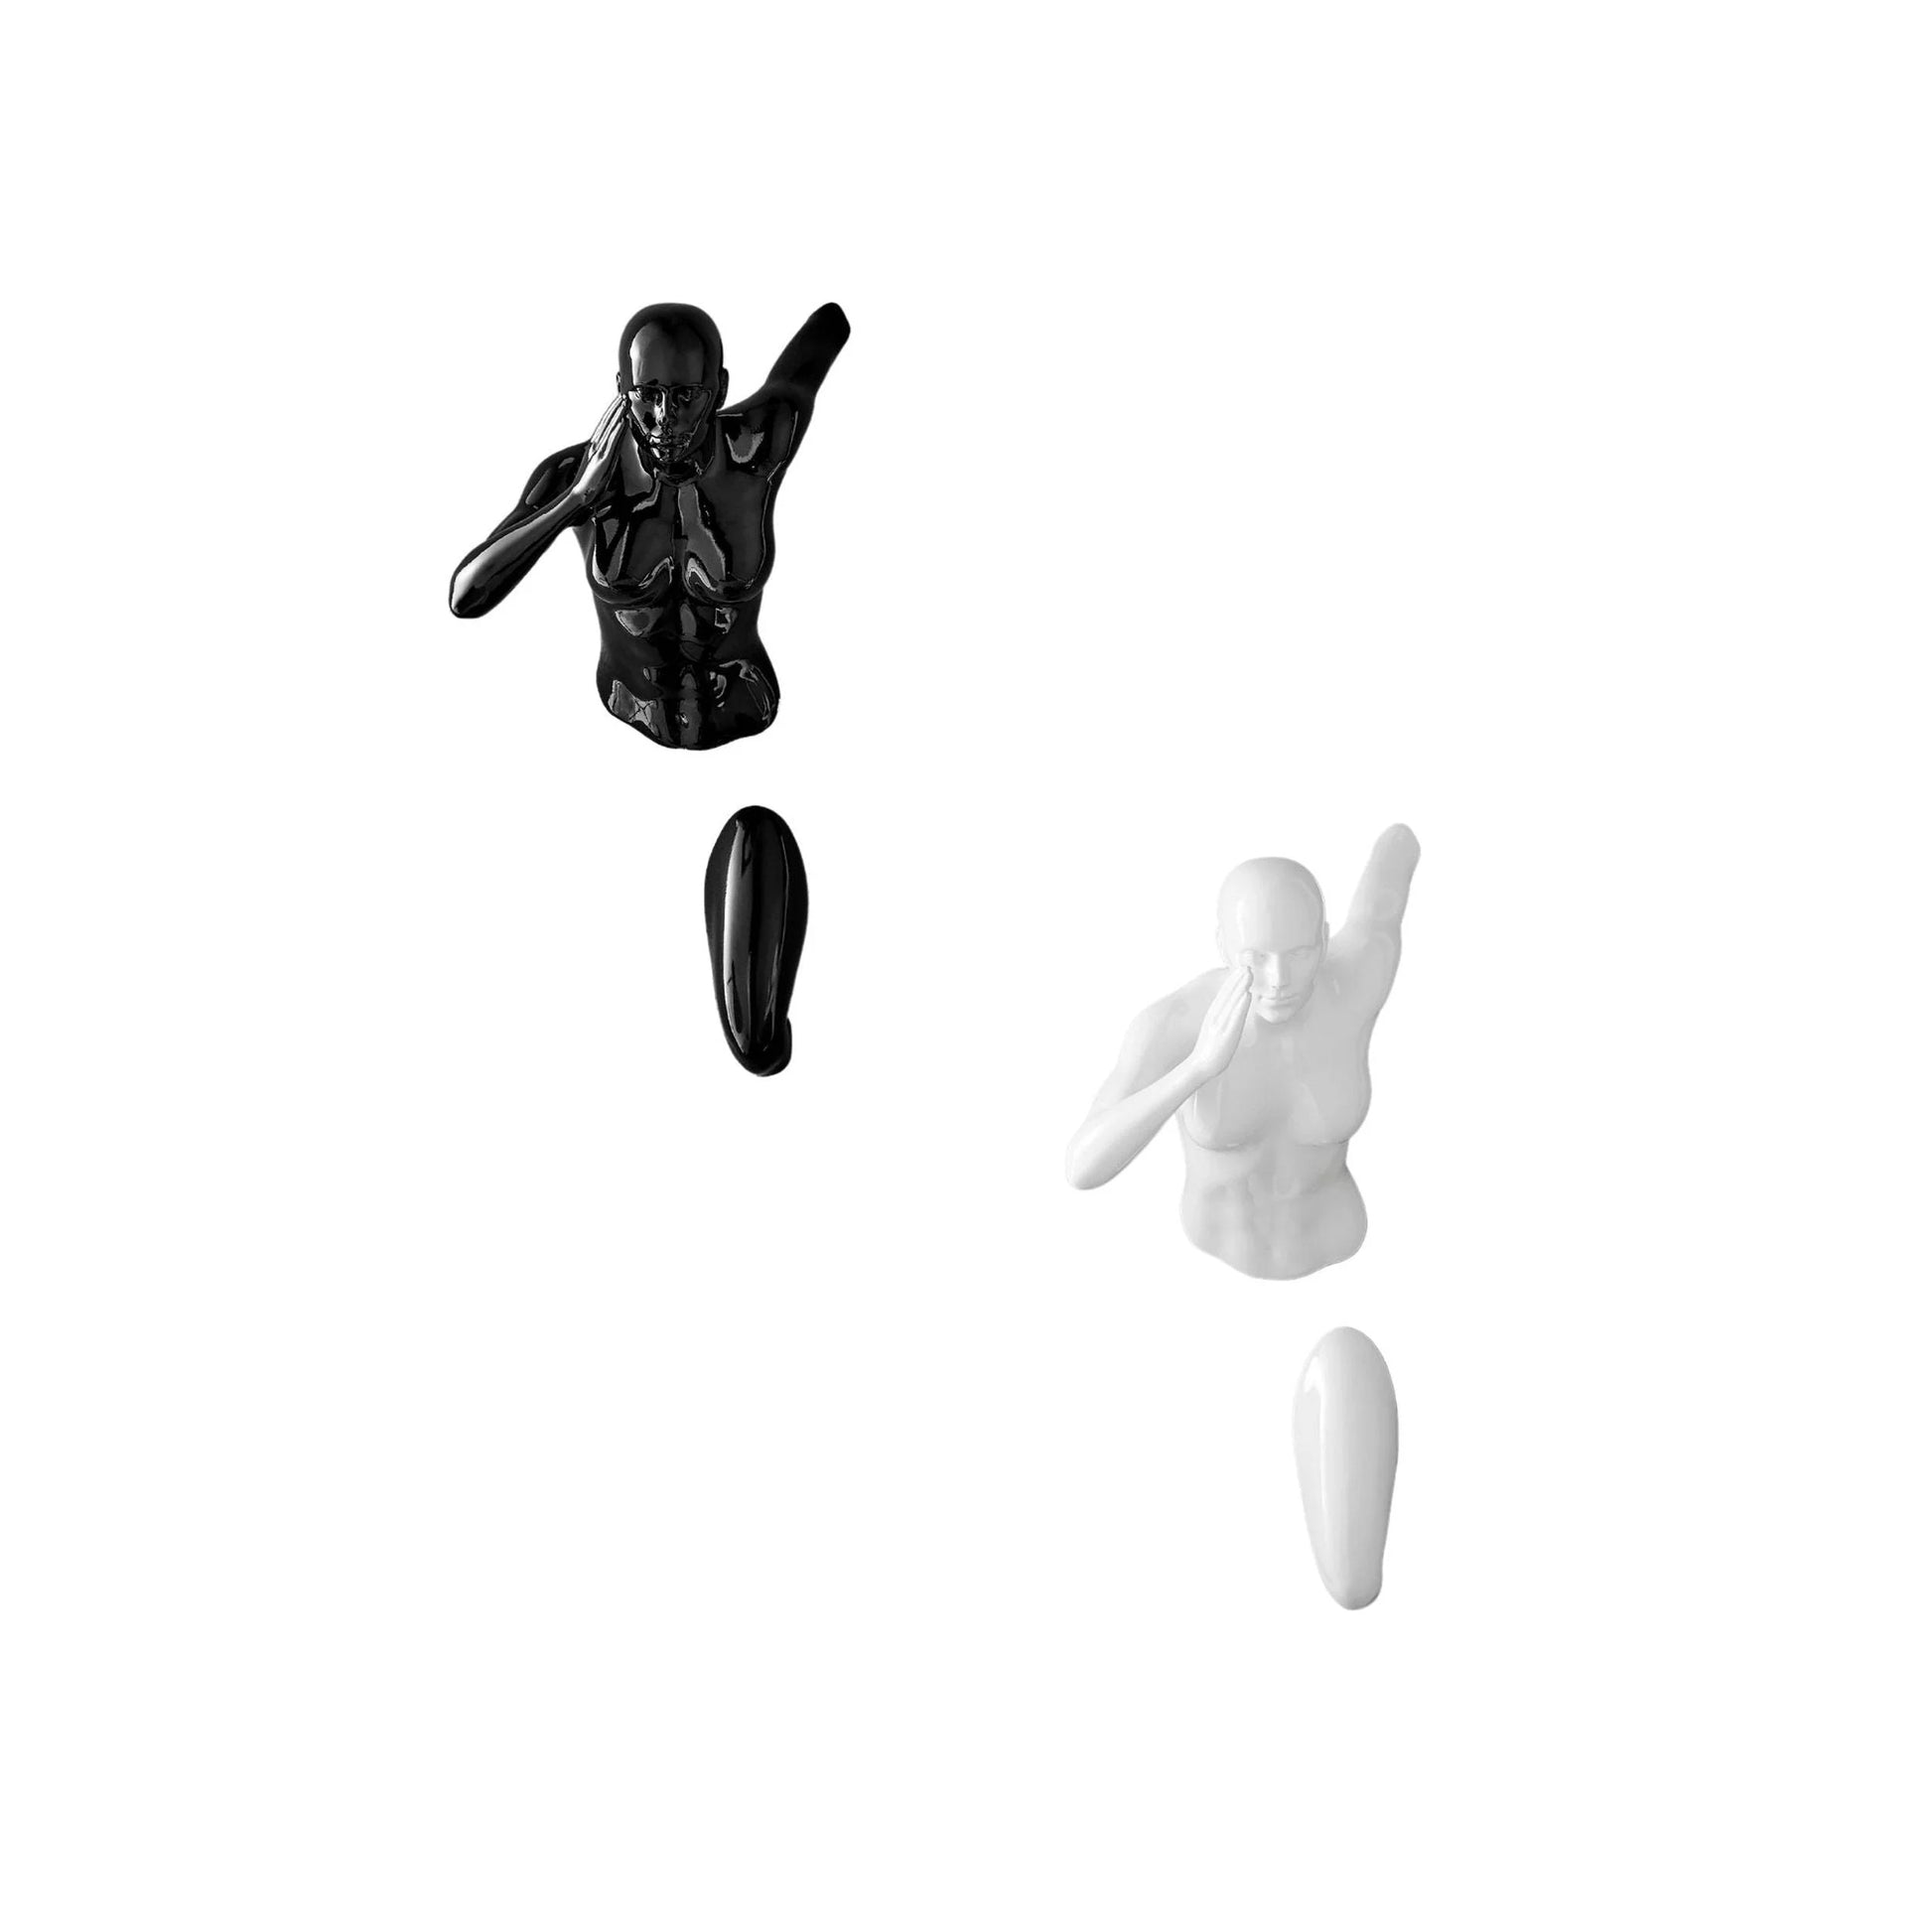 Finesse Decor Two Women Wall Runner Sculptures - Black and White 1